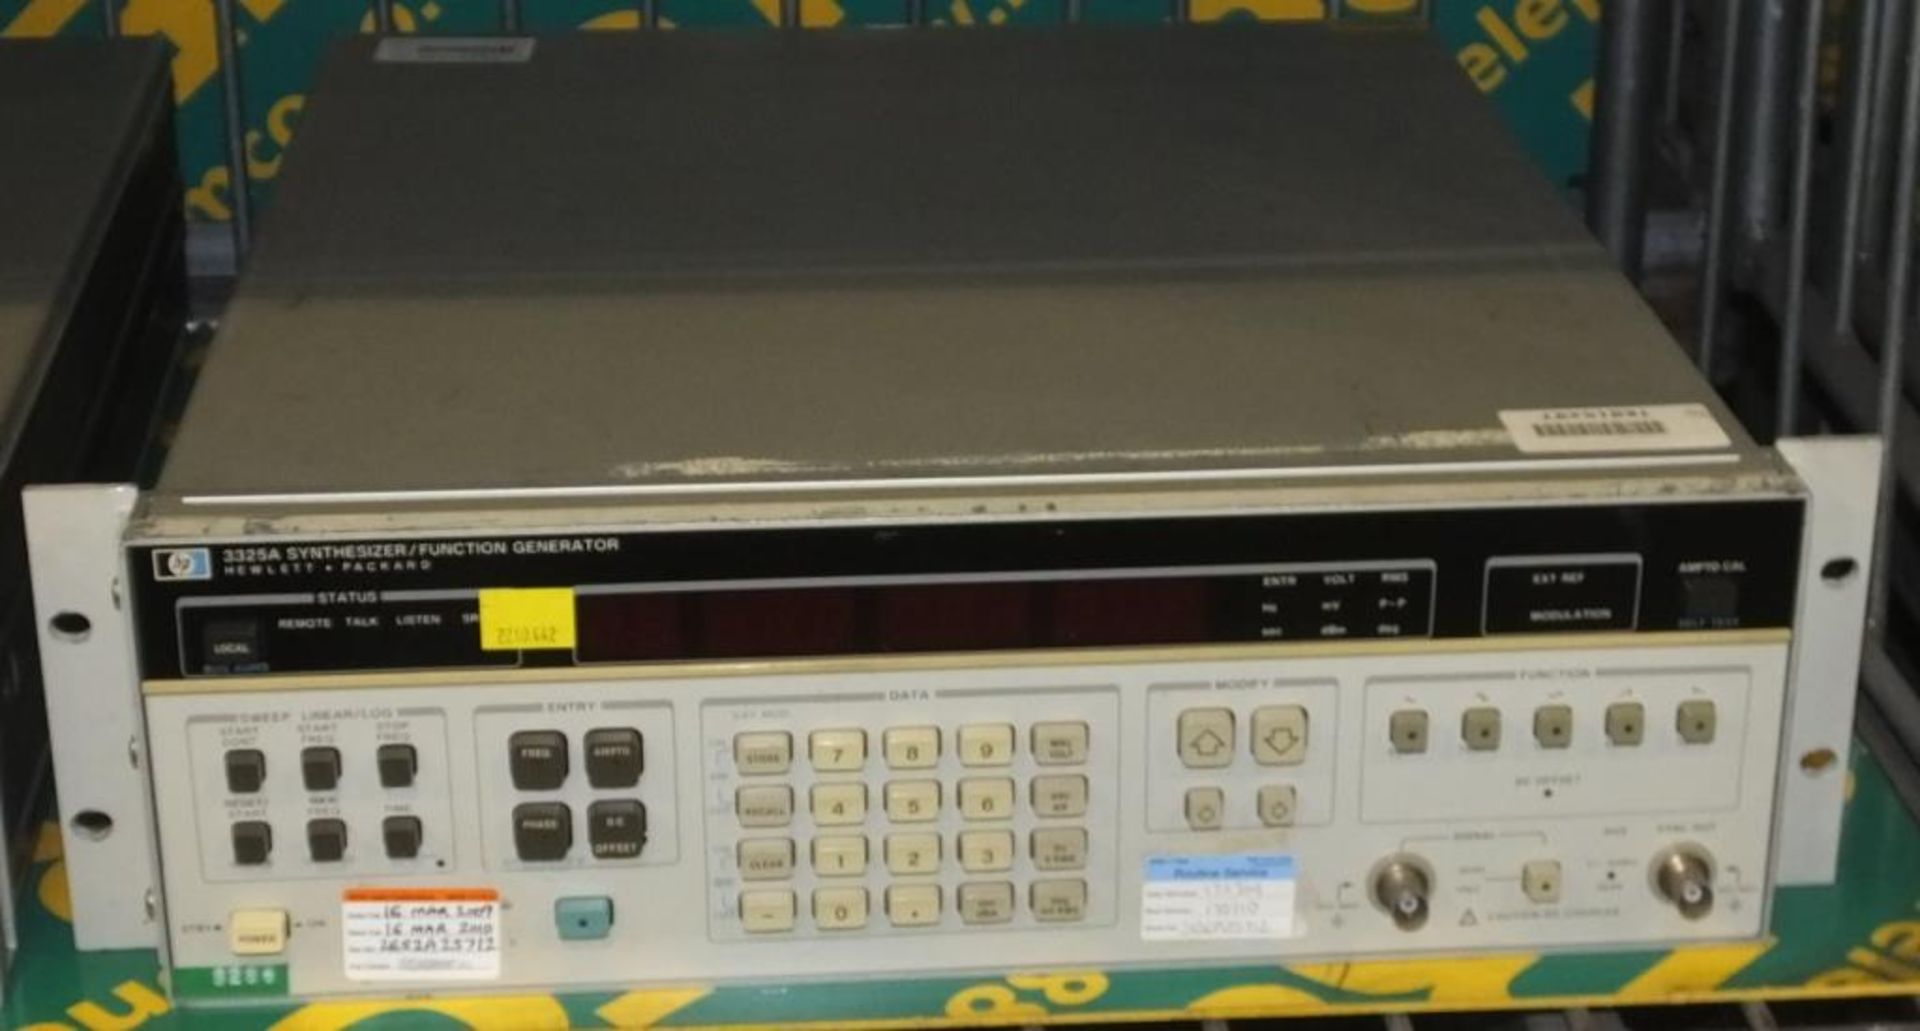 HP 3325A Synthesizer / Function Generator